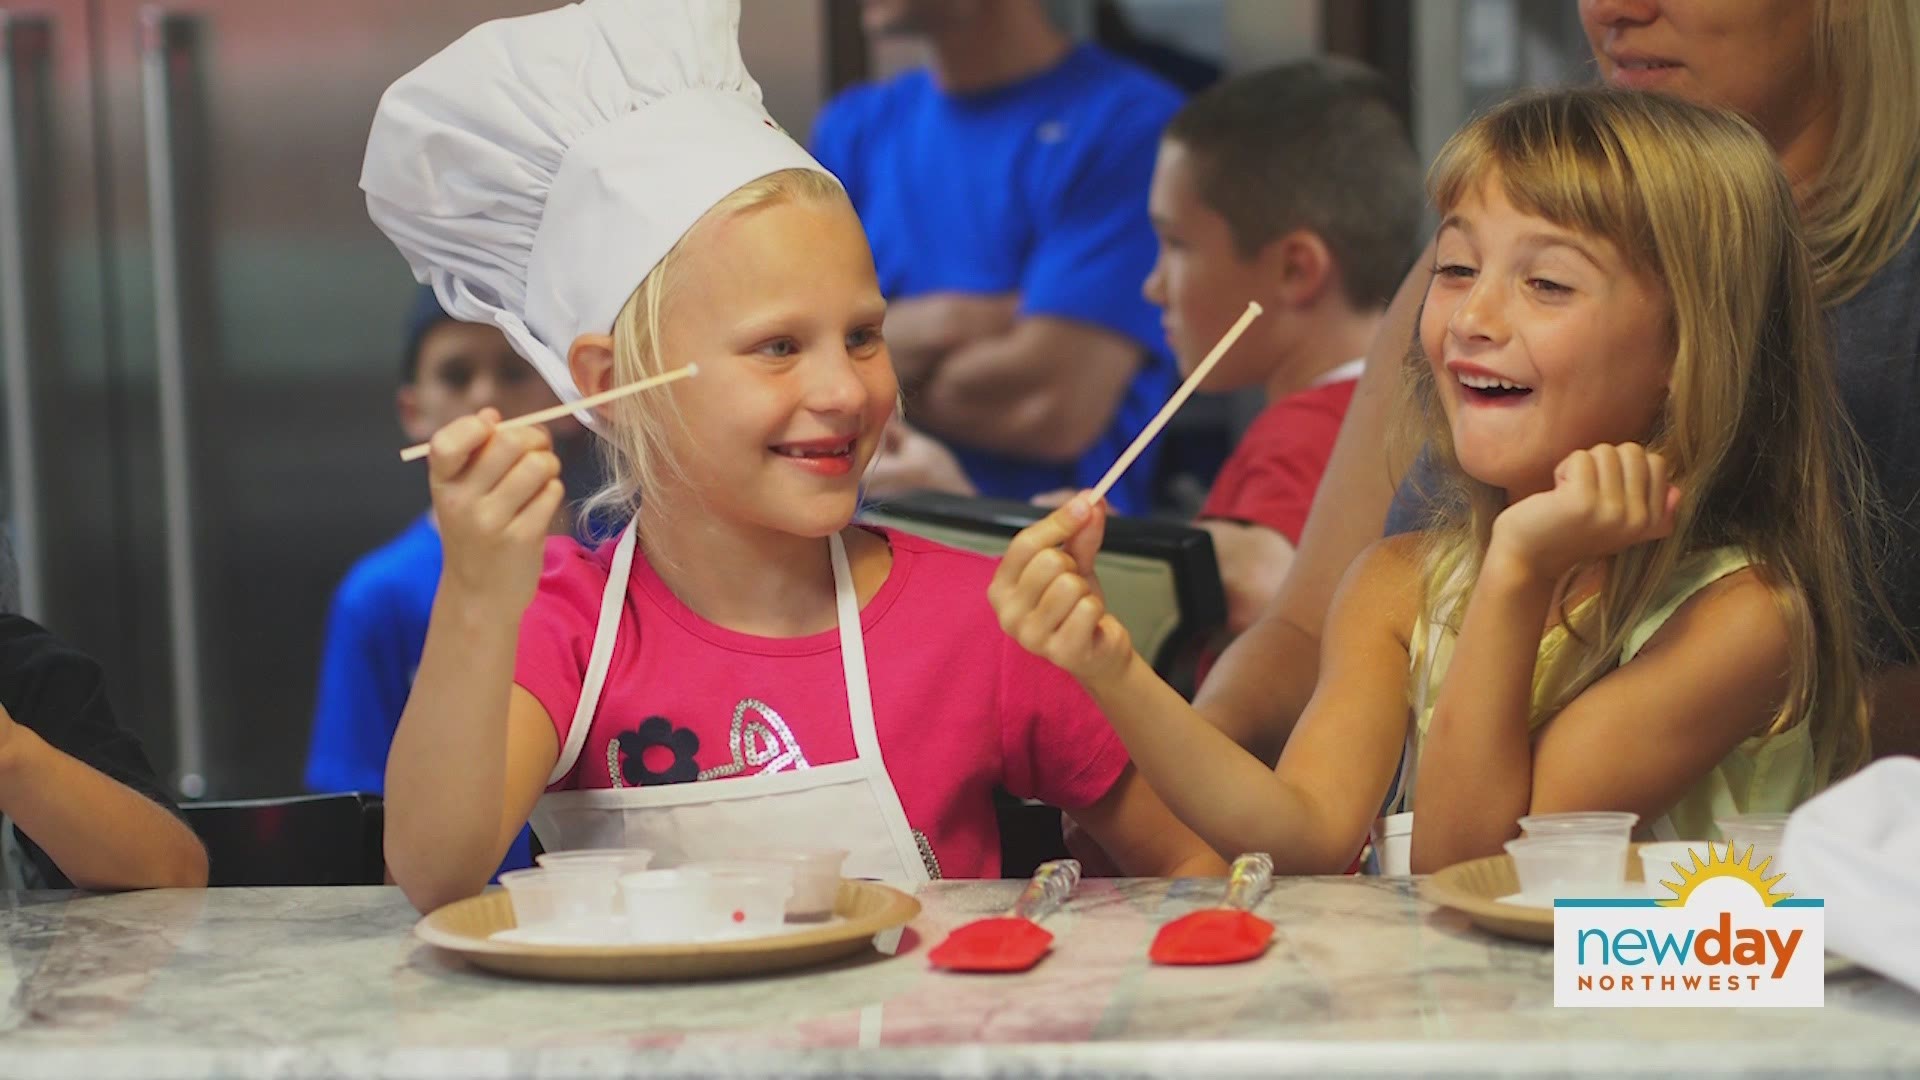 Spoons Across America has fun & educational programs to get your kids eating healthy